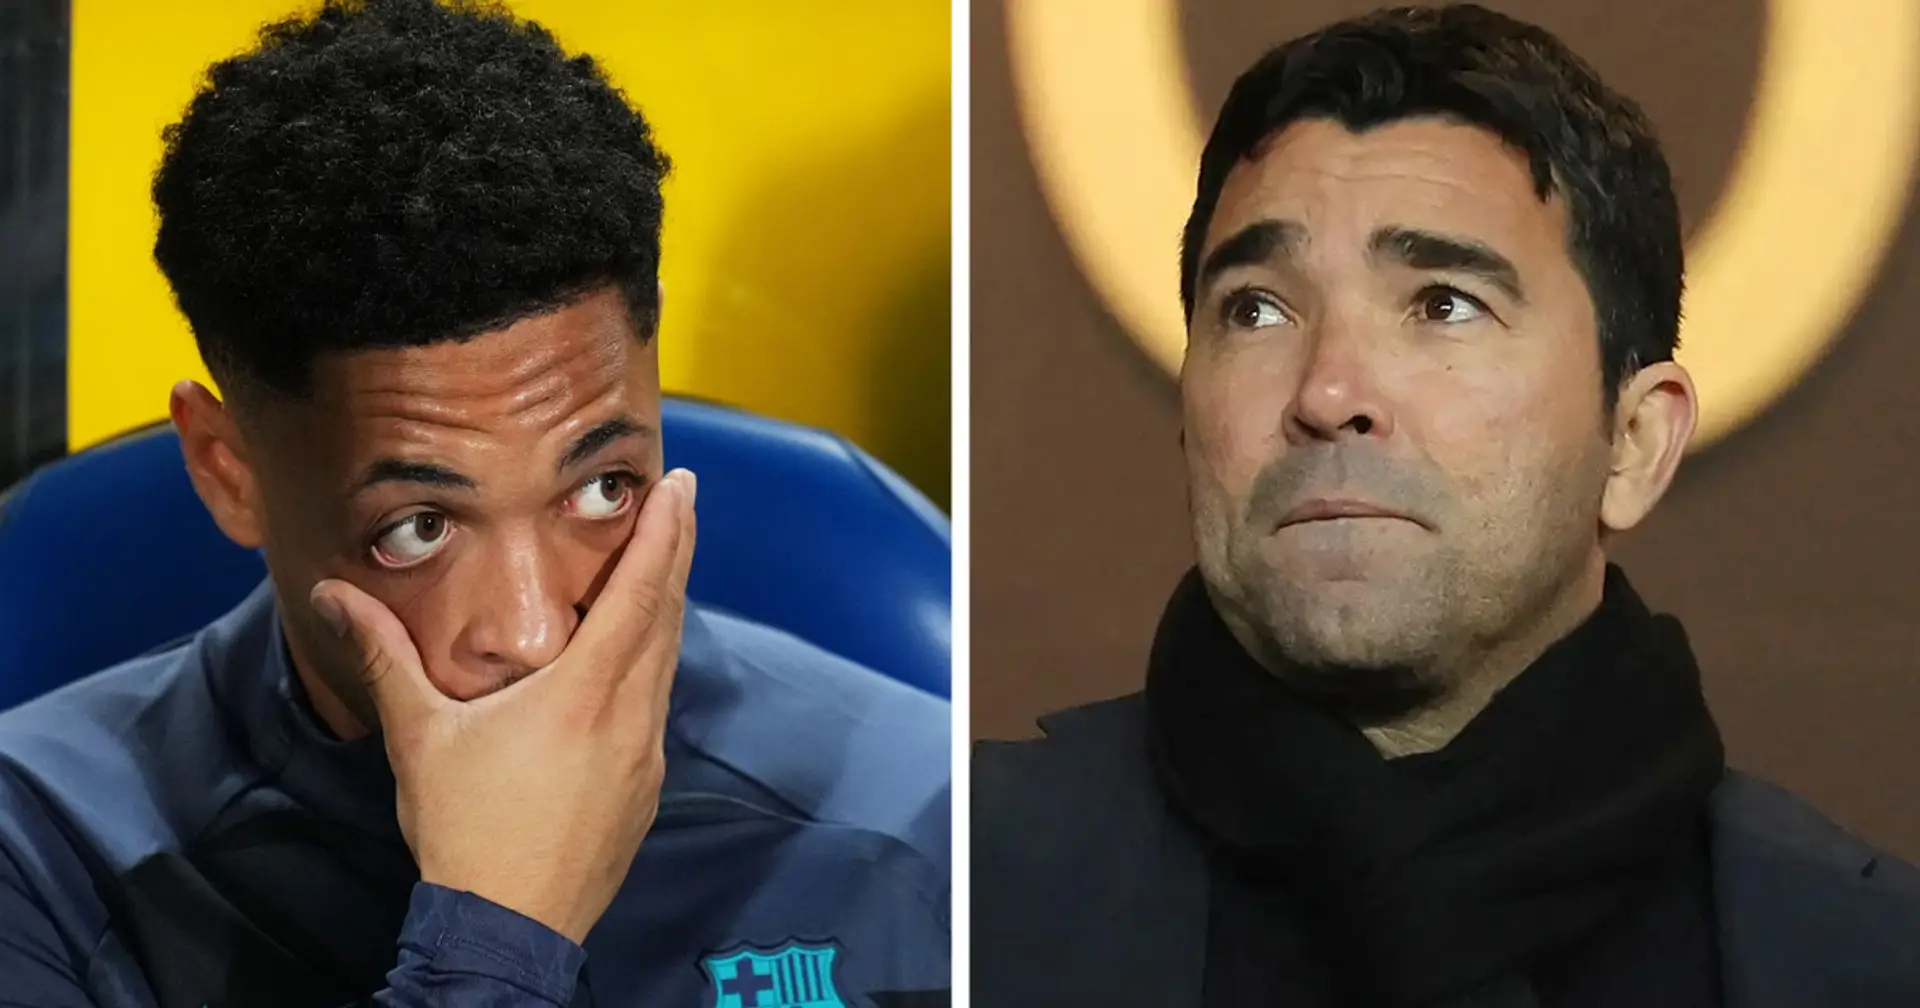 Barca fan gives reason why Roque has no future at Barca - it's all the club's fault